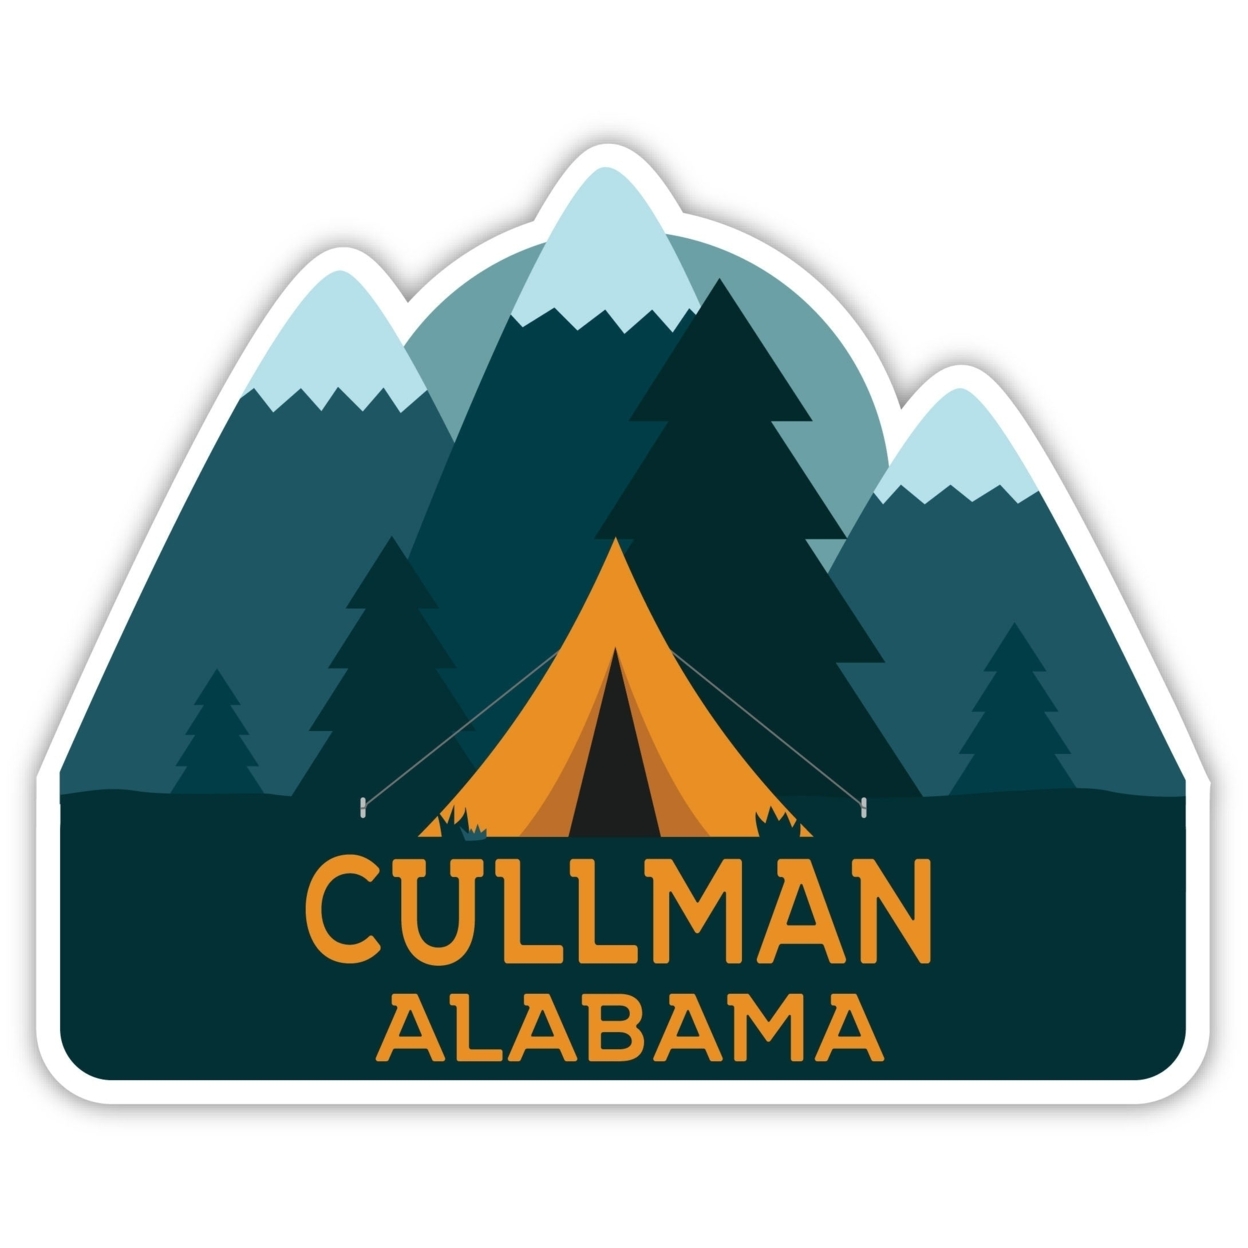 Cullman Alabama Souvenir Decorative Stickers (Choose Theme And Size) - 4-Pack, 2-Inch, Adventures Awaits